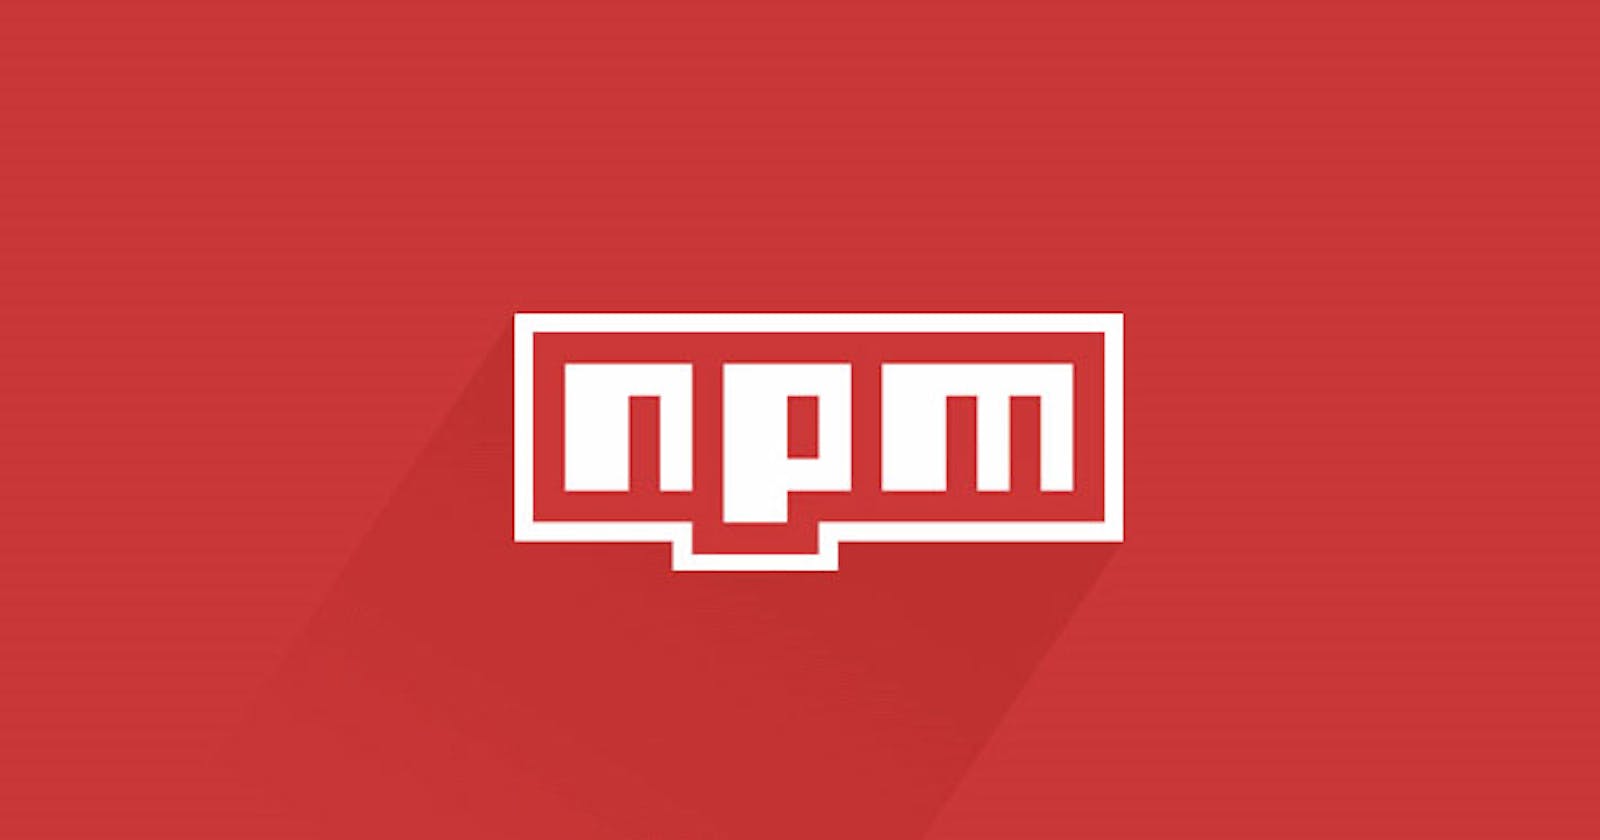 A Comprehensive Guide To Creating and Publishing Your First NPM Package